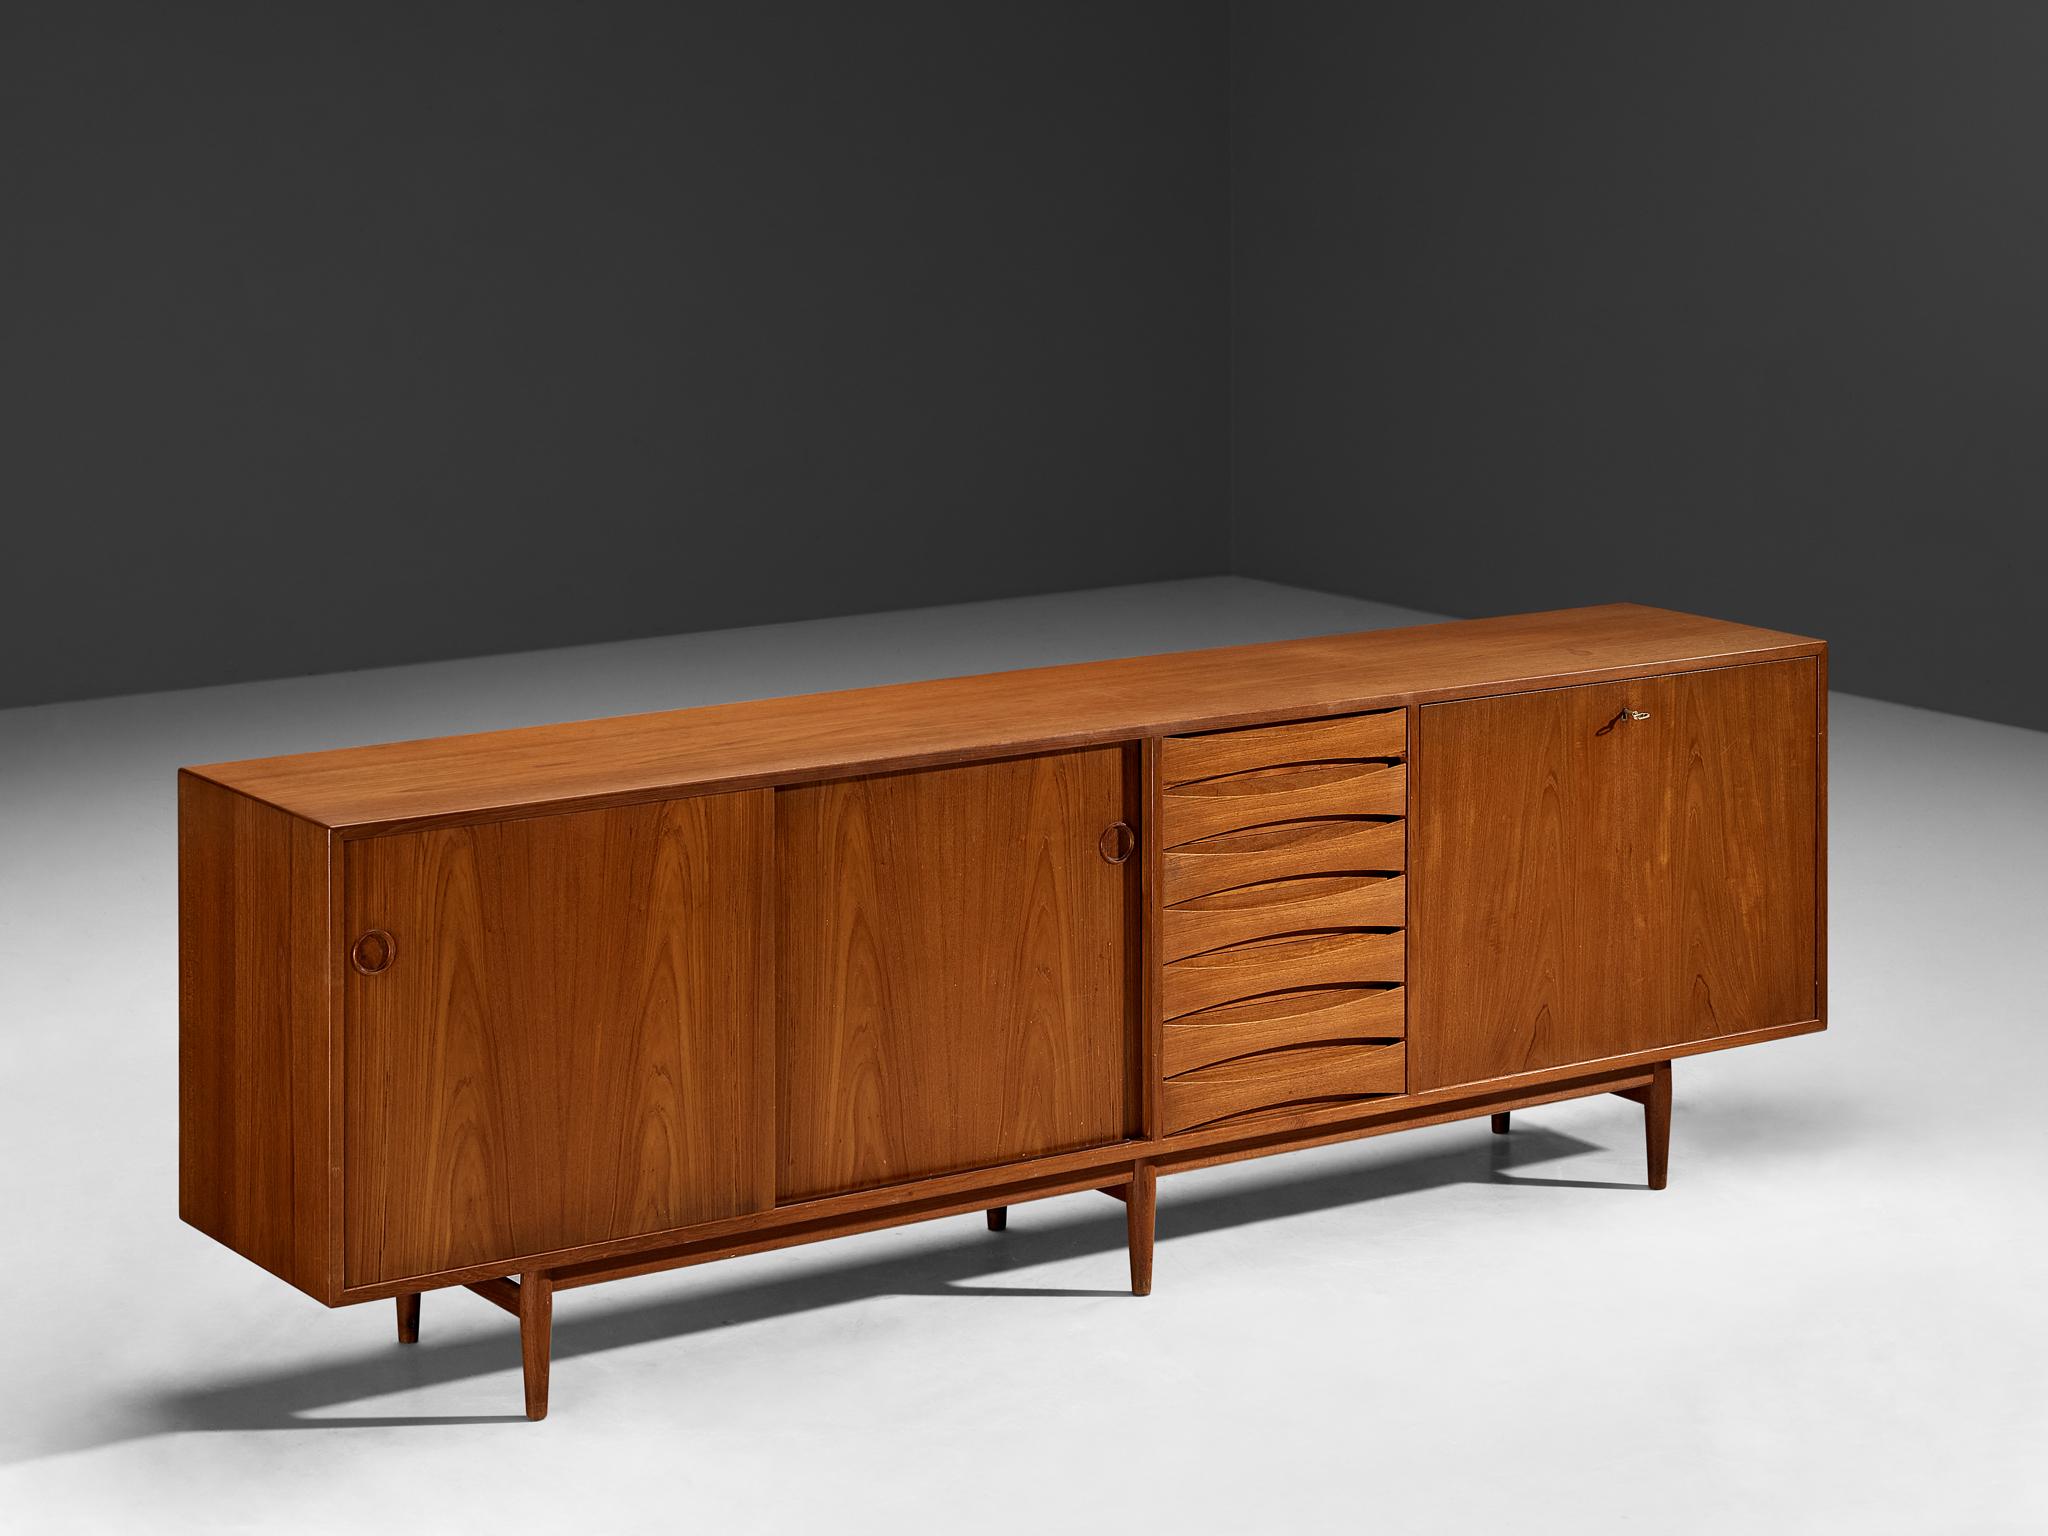 Arne Vodder for Sibast Møbler, credenza model 29A, teak, metal, Denmark, 1959

This iconic sideboard in teak is designed by the Danish designer Arne Vodder. The typical refined Vodder details can be found on this sideboard such as the characteristic